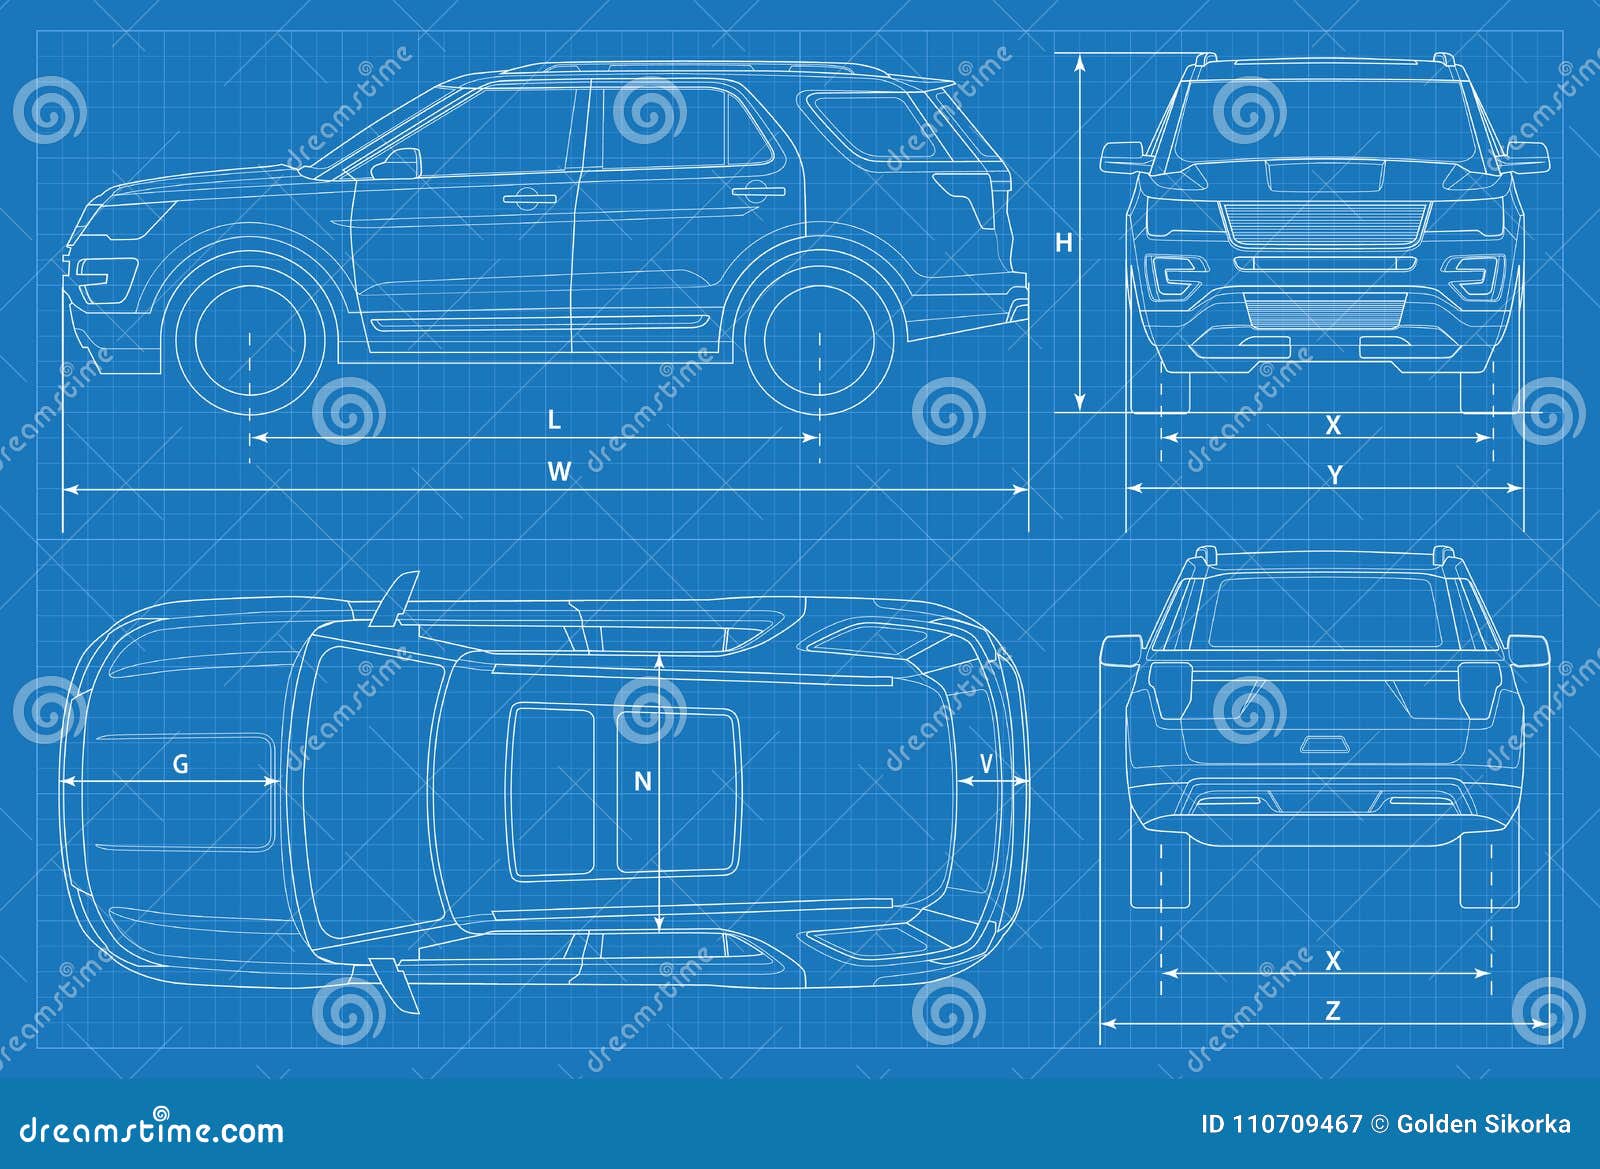 off-road car schematic or suv car blueprint.  . off road vehicle in outline. business vehicle template